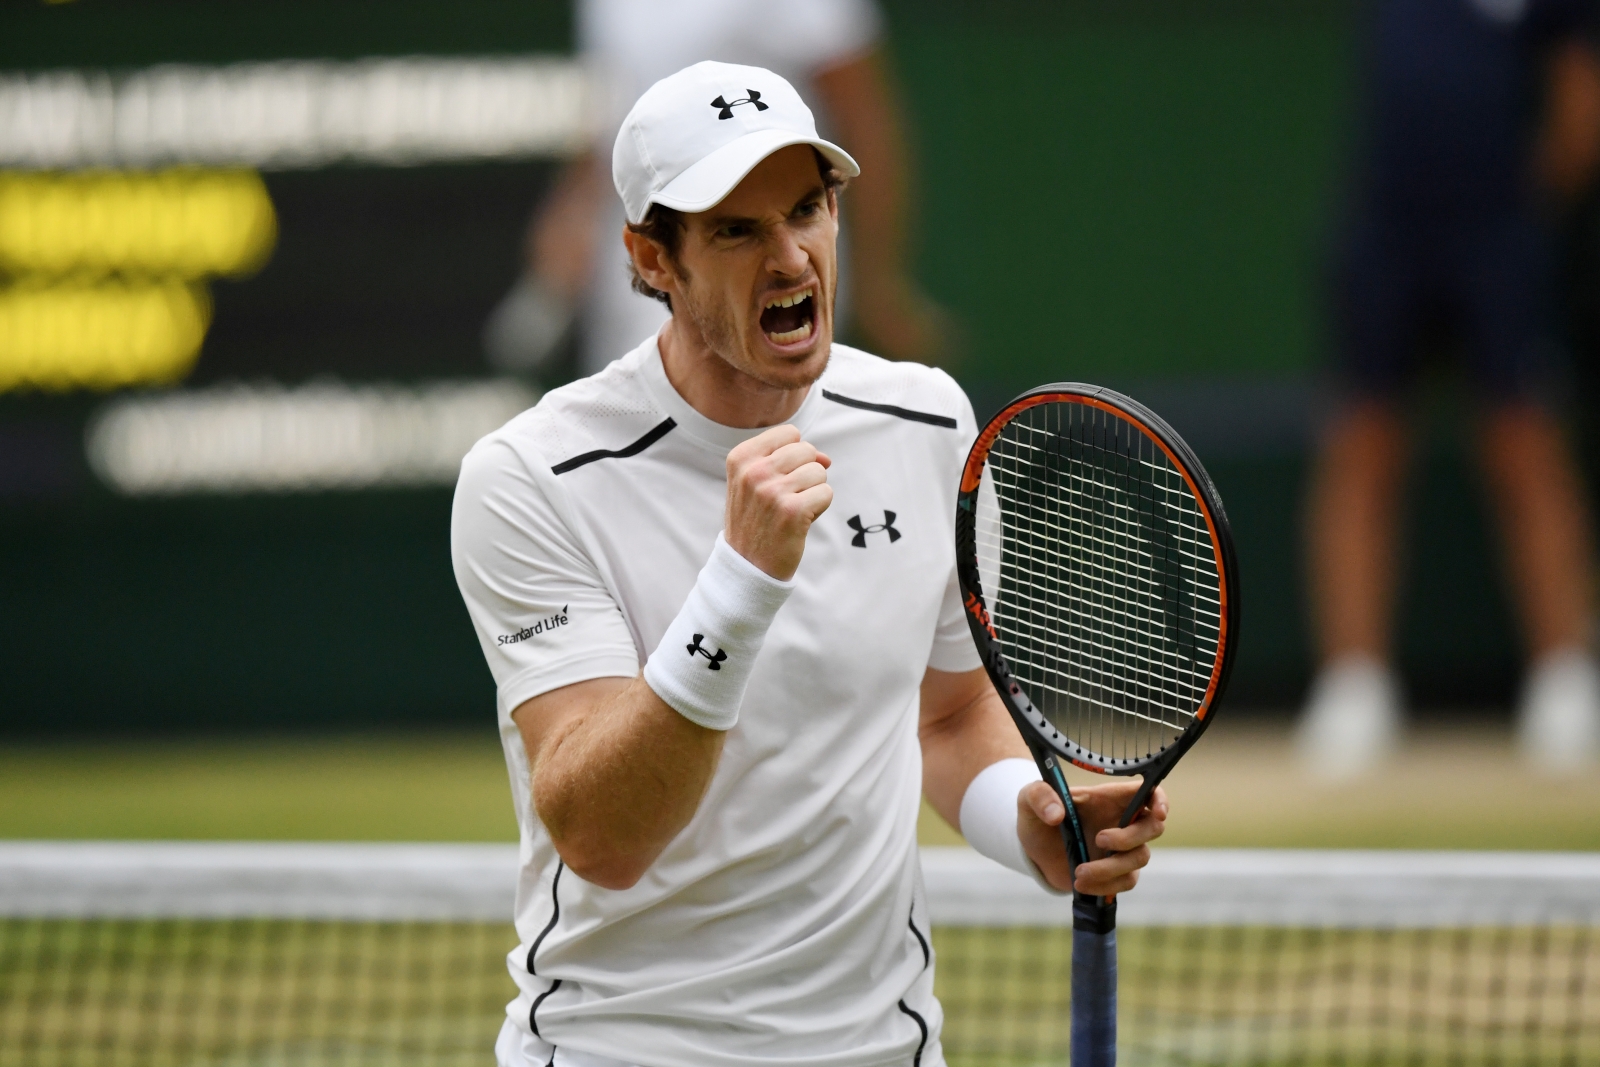 andy murray - photo #9